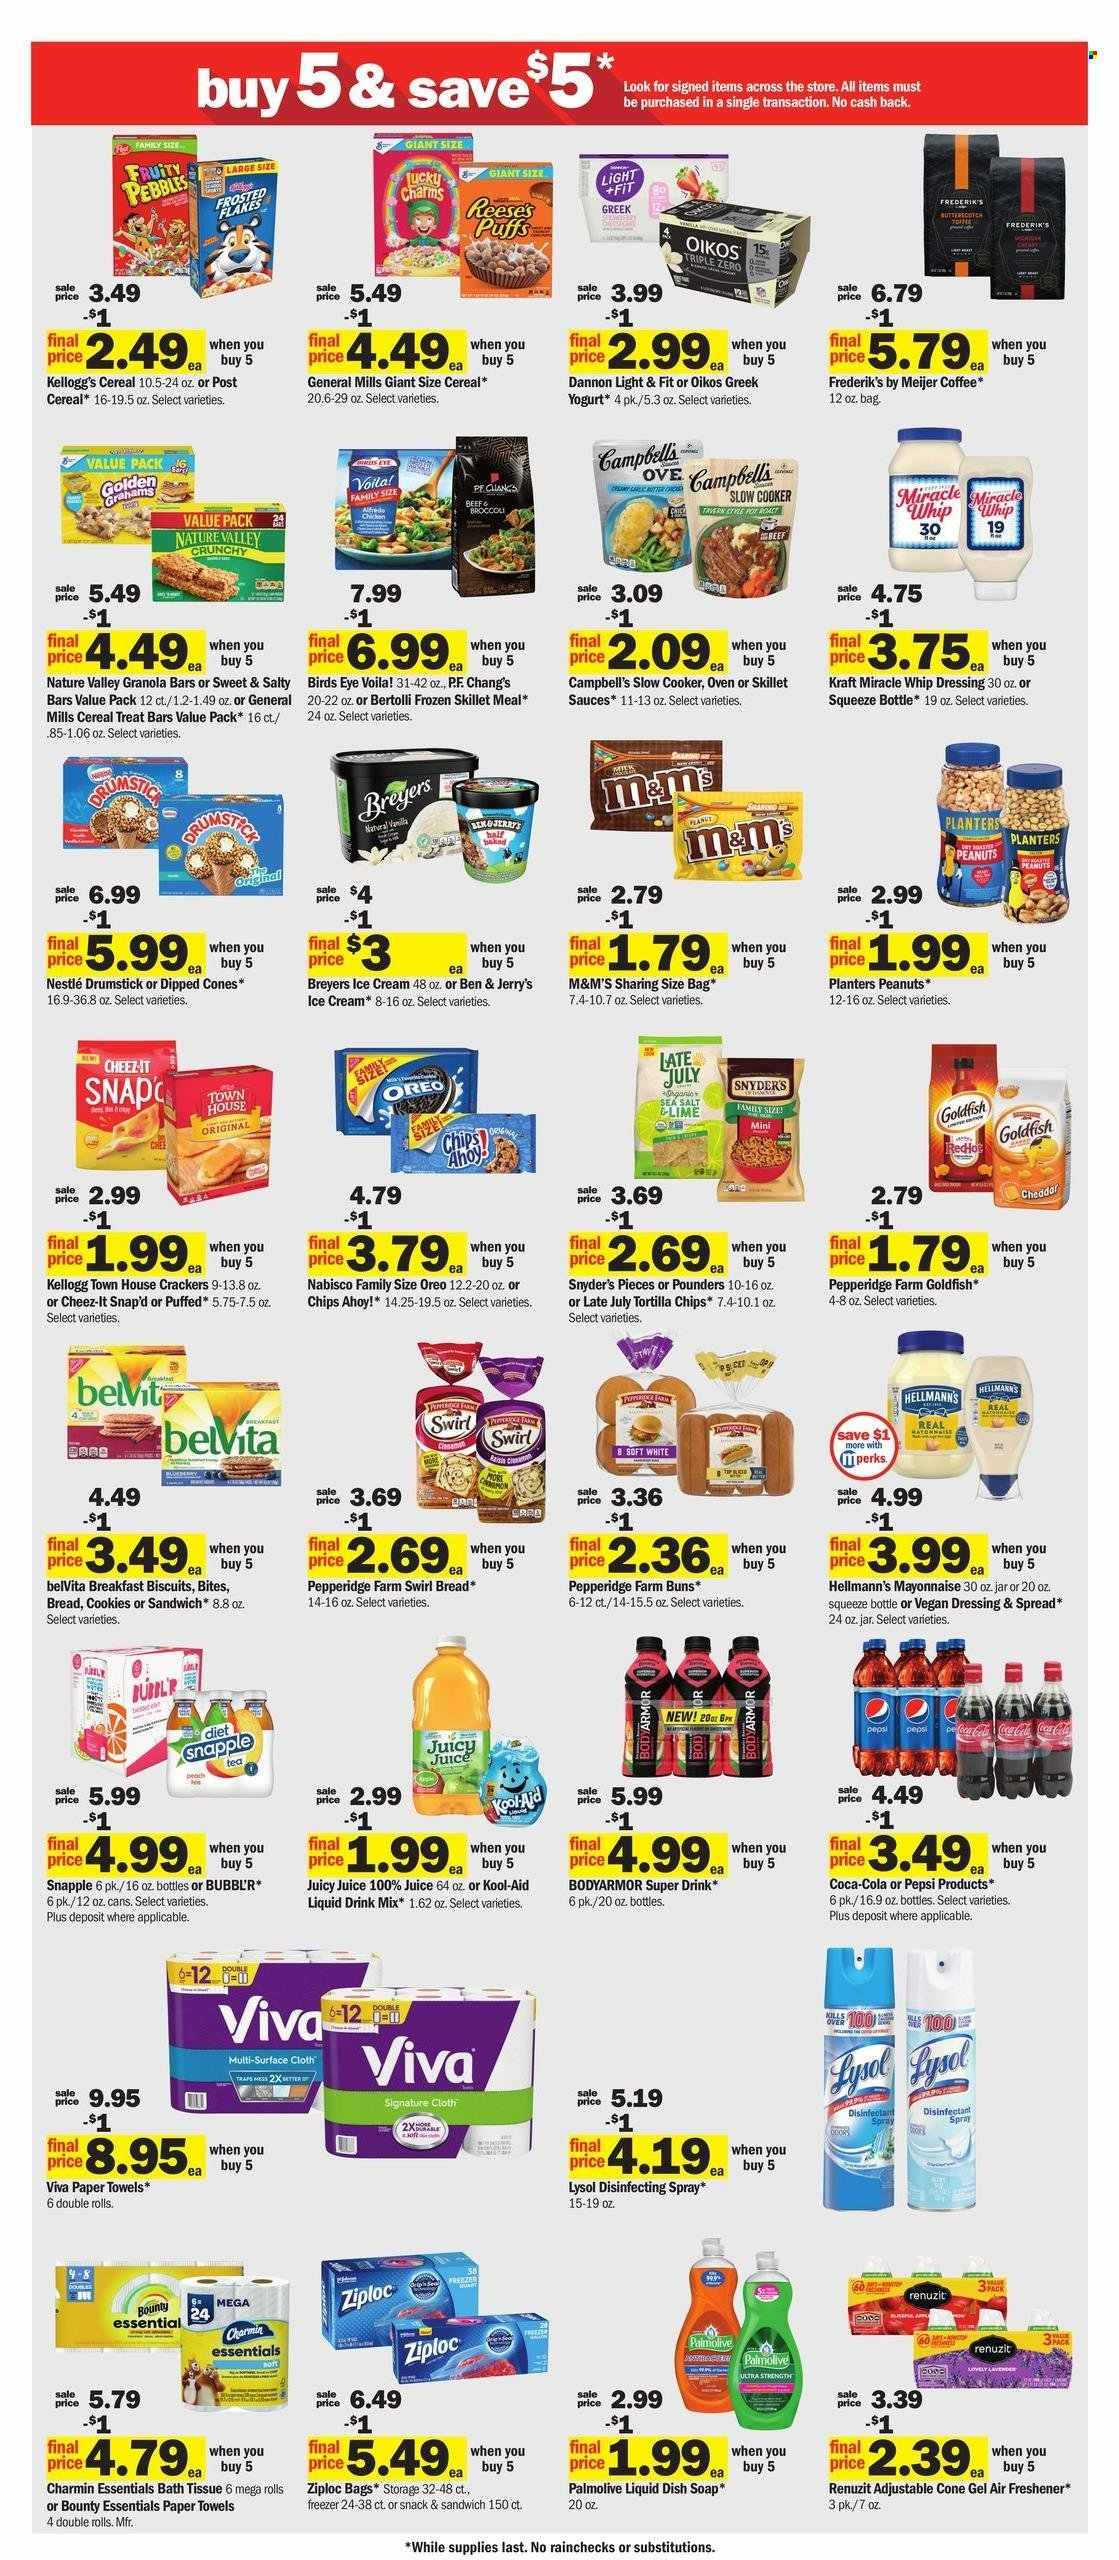 thumbnail - Meijer Flyer - 01/29/2023 - 02/04/2023 - Sales products - buns, puffs, Campbell's, Bird's Eye, Kraft®, Bertolli, greek yoghurt, Oreo, yoghurt, Oikos, Dannon, milk, mayonnaise, Miracle Whip, Hellmann’s, ice cream, Reese's, Ben & Jerry's, butterscotch, cookies, Nestlé, Bounty, M&M's, crackers, Kellogg's, biscuit, Chips Ahoy!, tortilla chips, Goldfish, Cheez-It, cereals, granola bar, Fruity Pebbles, belVita, Nature Valley, dill, dressing, peanuts, Planters, Coca-Cola, Pepsi, juice, Snapple, coffee, bath tissue, kitchen towels, paper towels, Charmin, desinfection, Lysol, Palmolive, soap, Ziploc, Renuzit, air freshener, oven, slow cooker. Page 4.